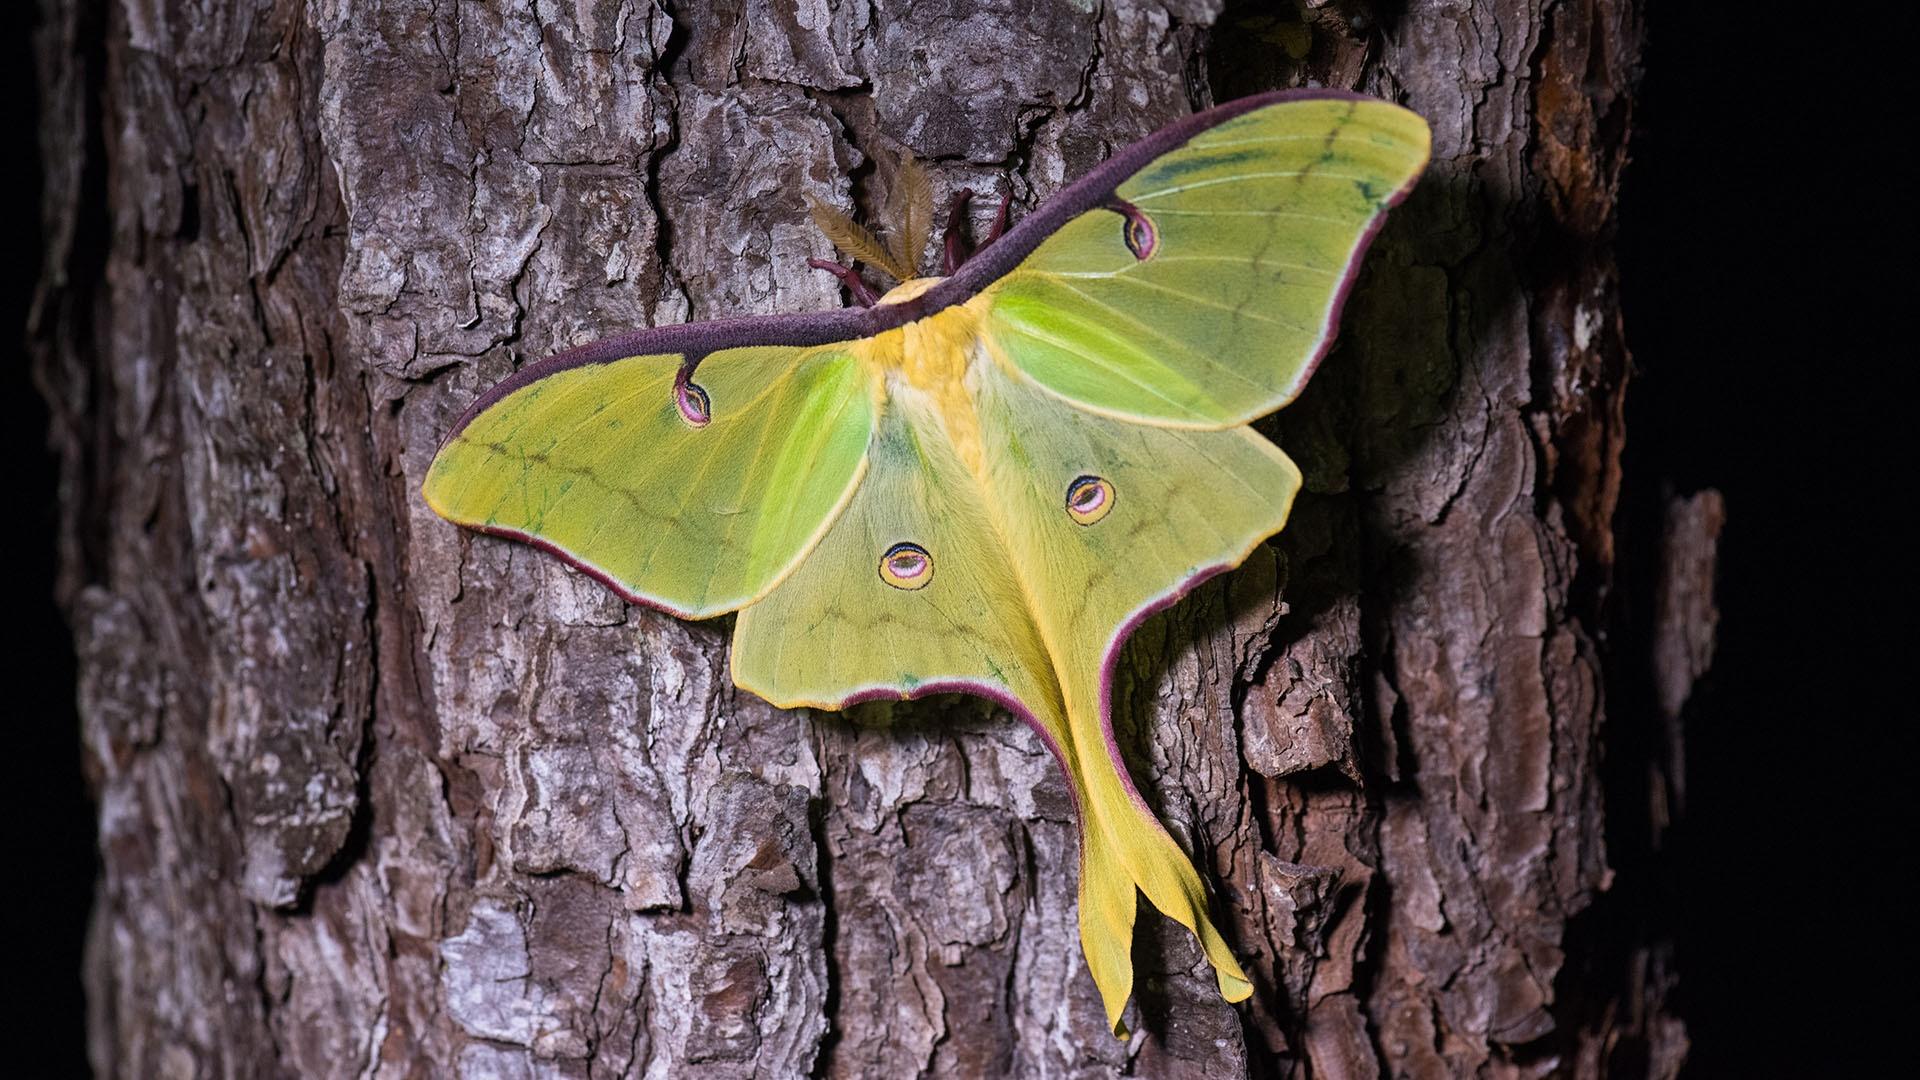 A Luna Moth rests briefly on a tree along Florida’s Apalachicola River.